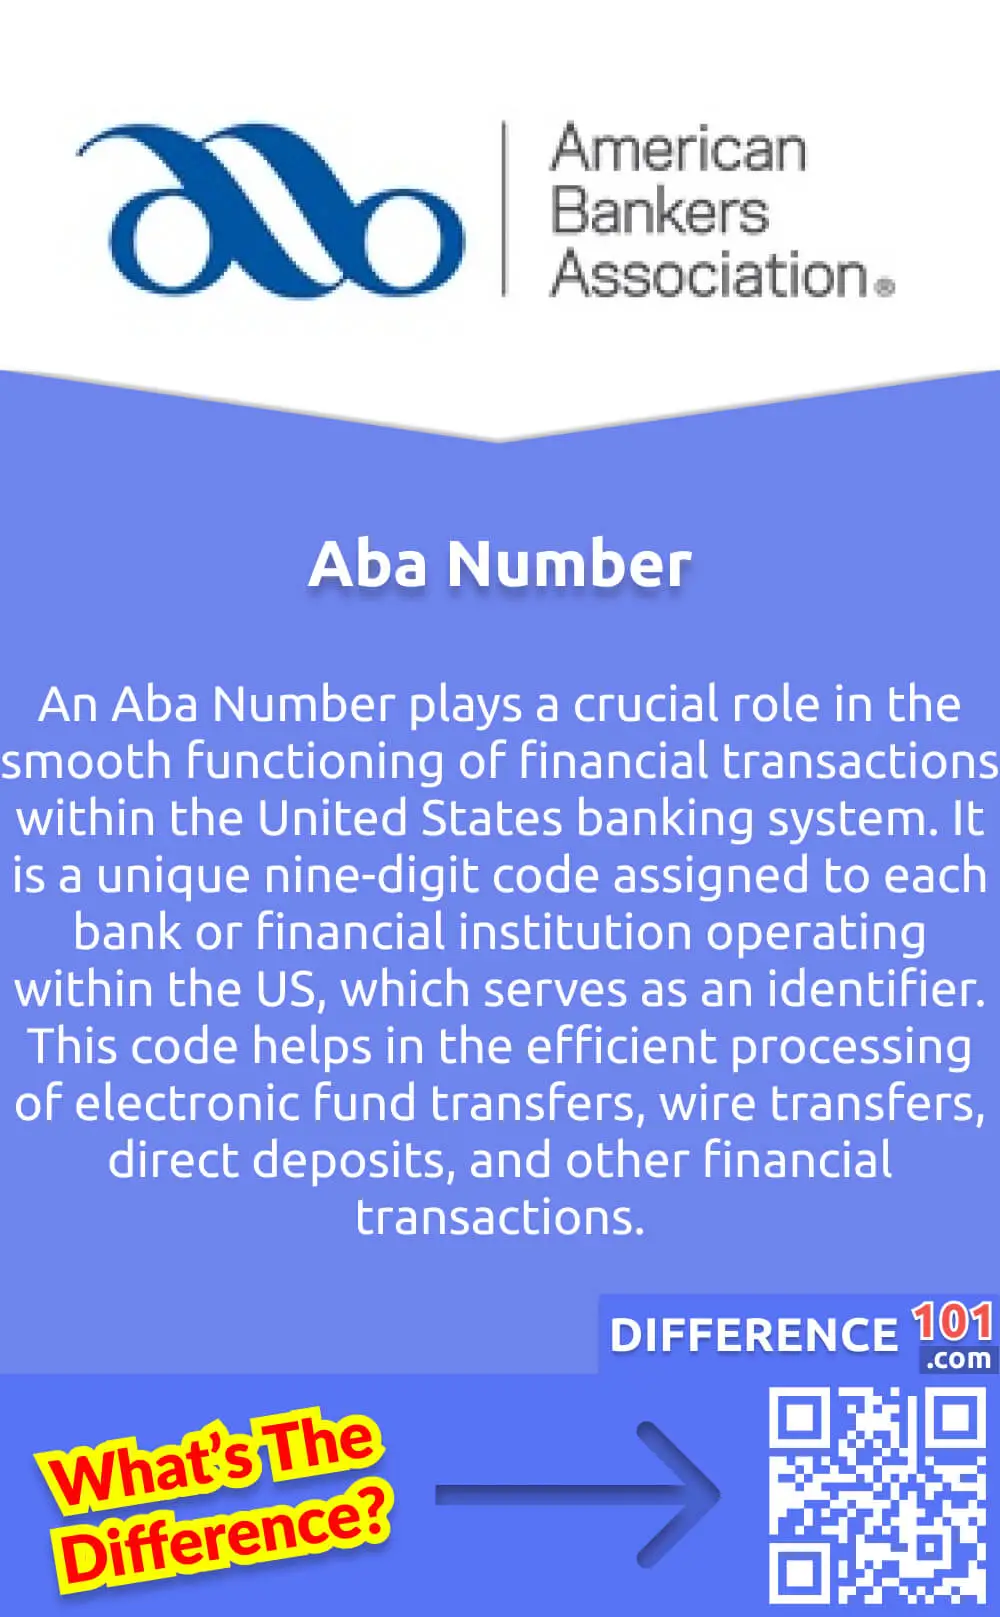 What Is Aba Number? An Aba Number plays a crucial role in the smooth functioning of financial transactions within the United States banking system. It is a unique nine-digit code assigned to each bank or financial institution operating within the US, which serves as an identifier. This code helps in the efficient processing of electronic fund transfers, wire transfers, direct deposits, and other financial transactions. Without an accurate Aba Number, financial transactions can stall or fail, leading to inconvenience and potential financial losses for all parties involved. Therefore, it is essential to ensure that the correct Aba Number is used for any transaction involving banks in the United States.
